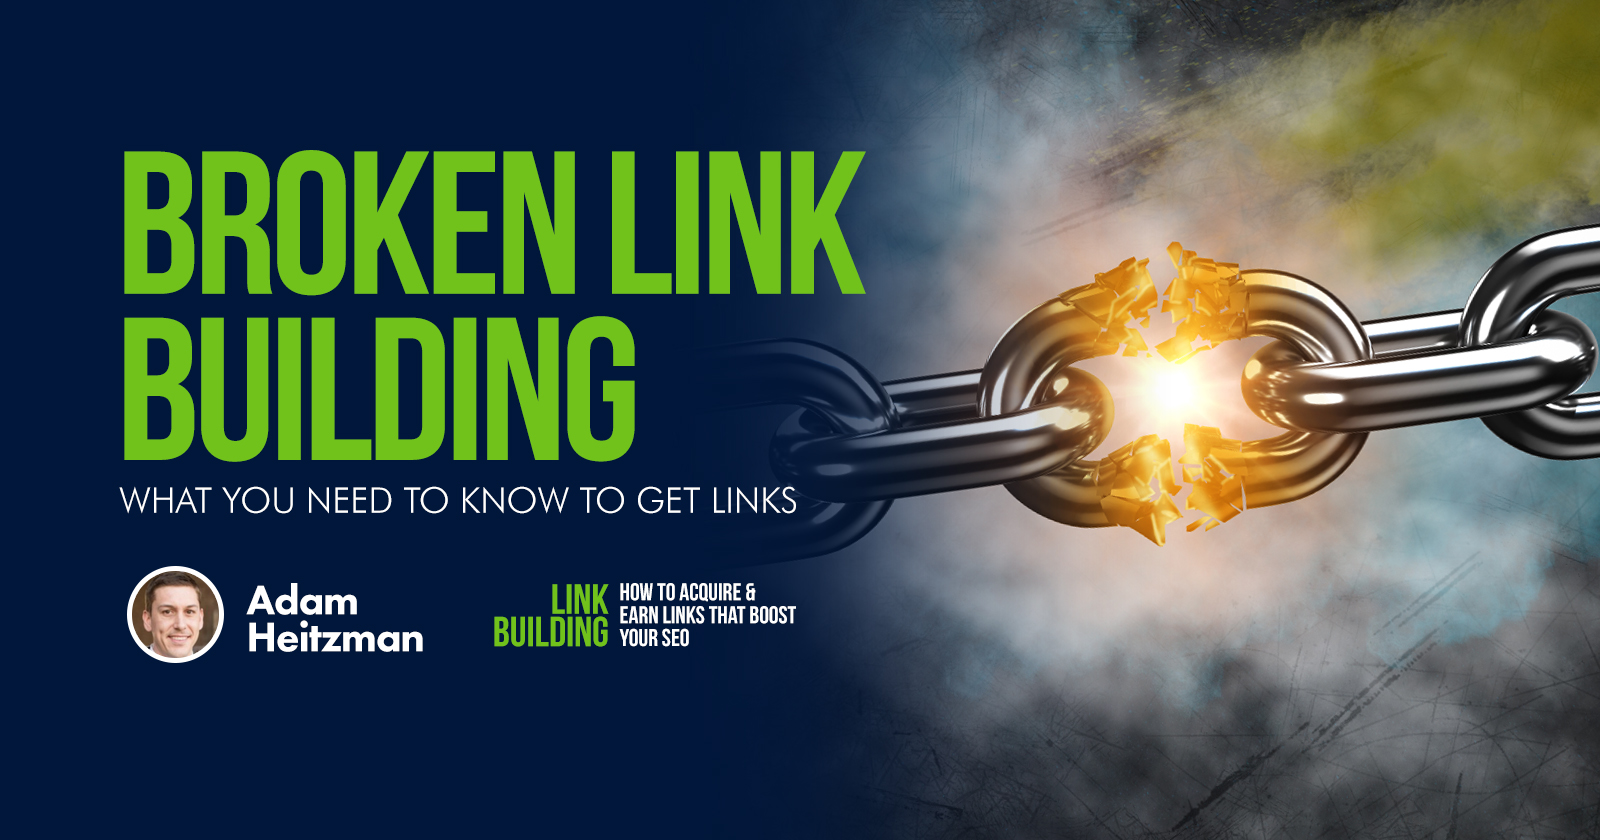 What You Need to Know to Get Links